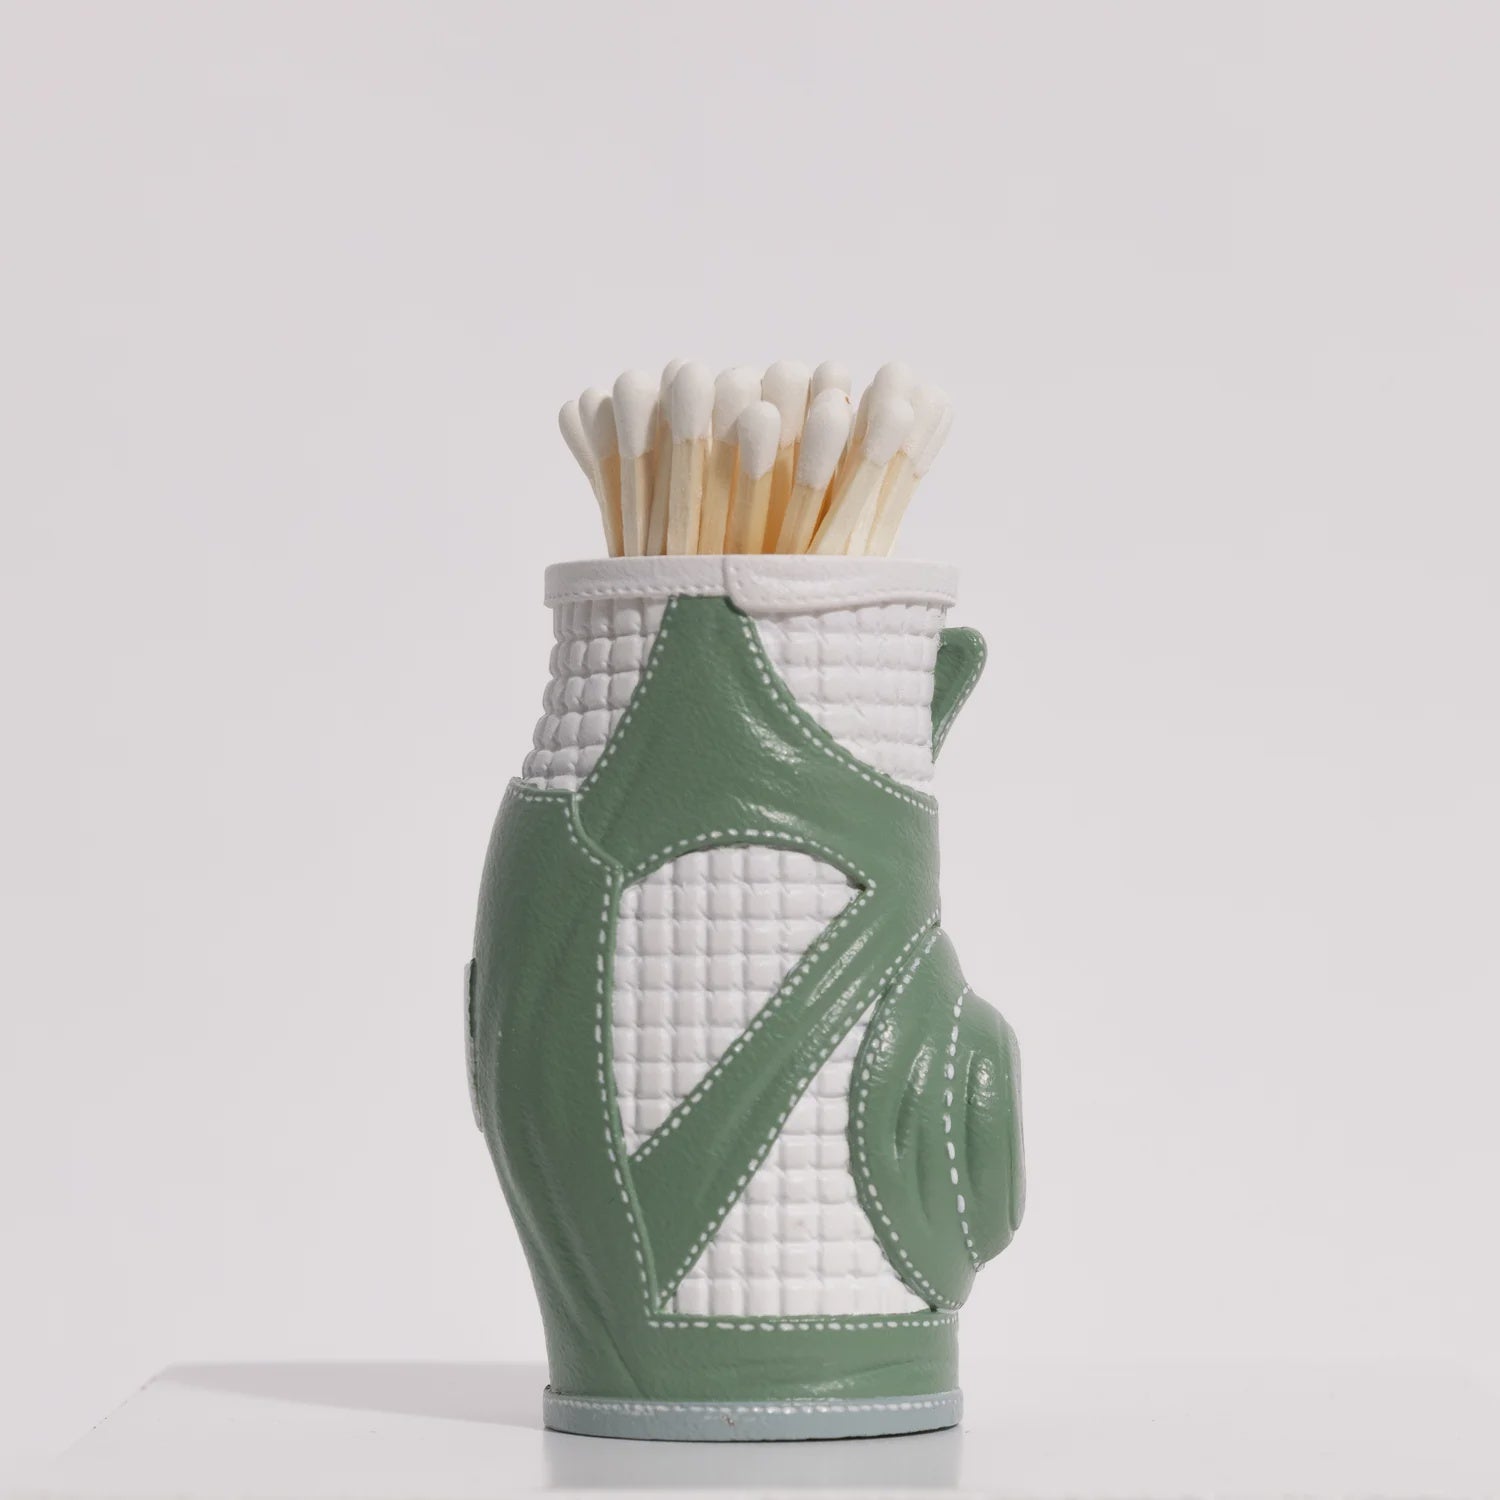 A Match South Matchstick Striker golf bag-shaped container holding several wooden matches, set against a plain white background. The bag is white with Arizona-style green accents.